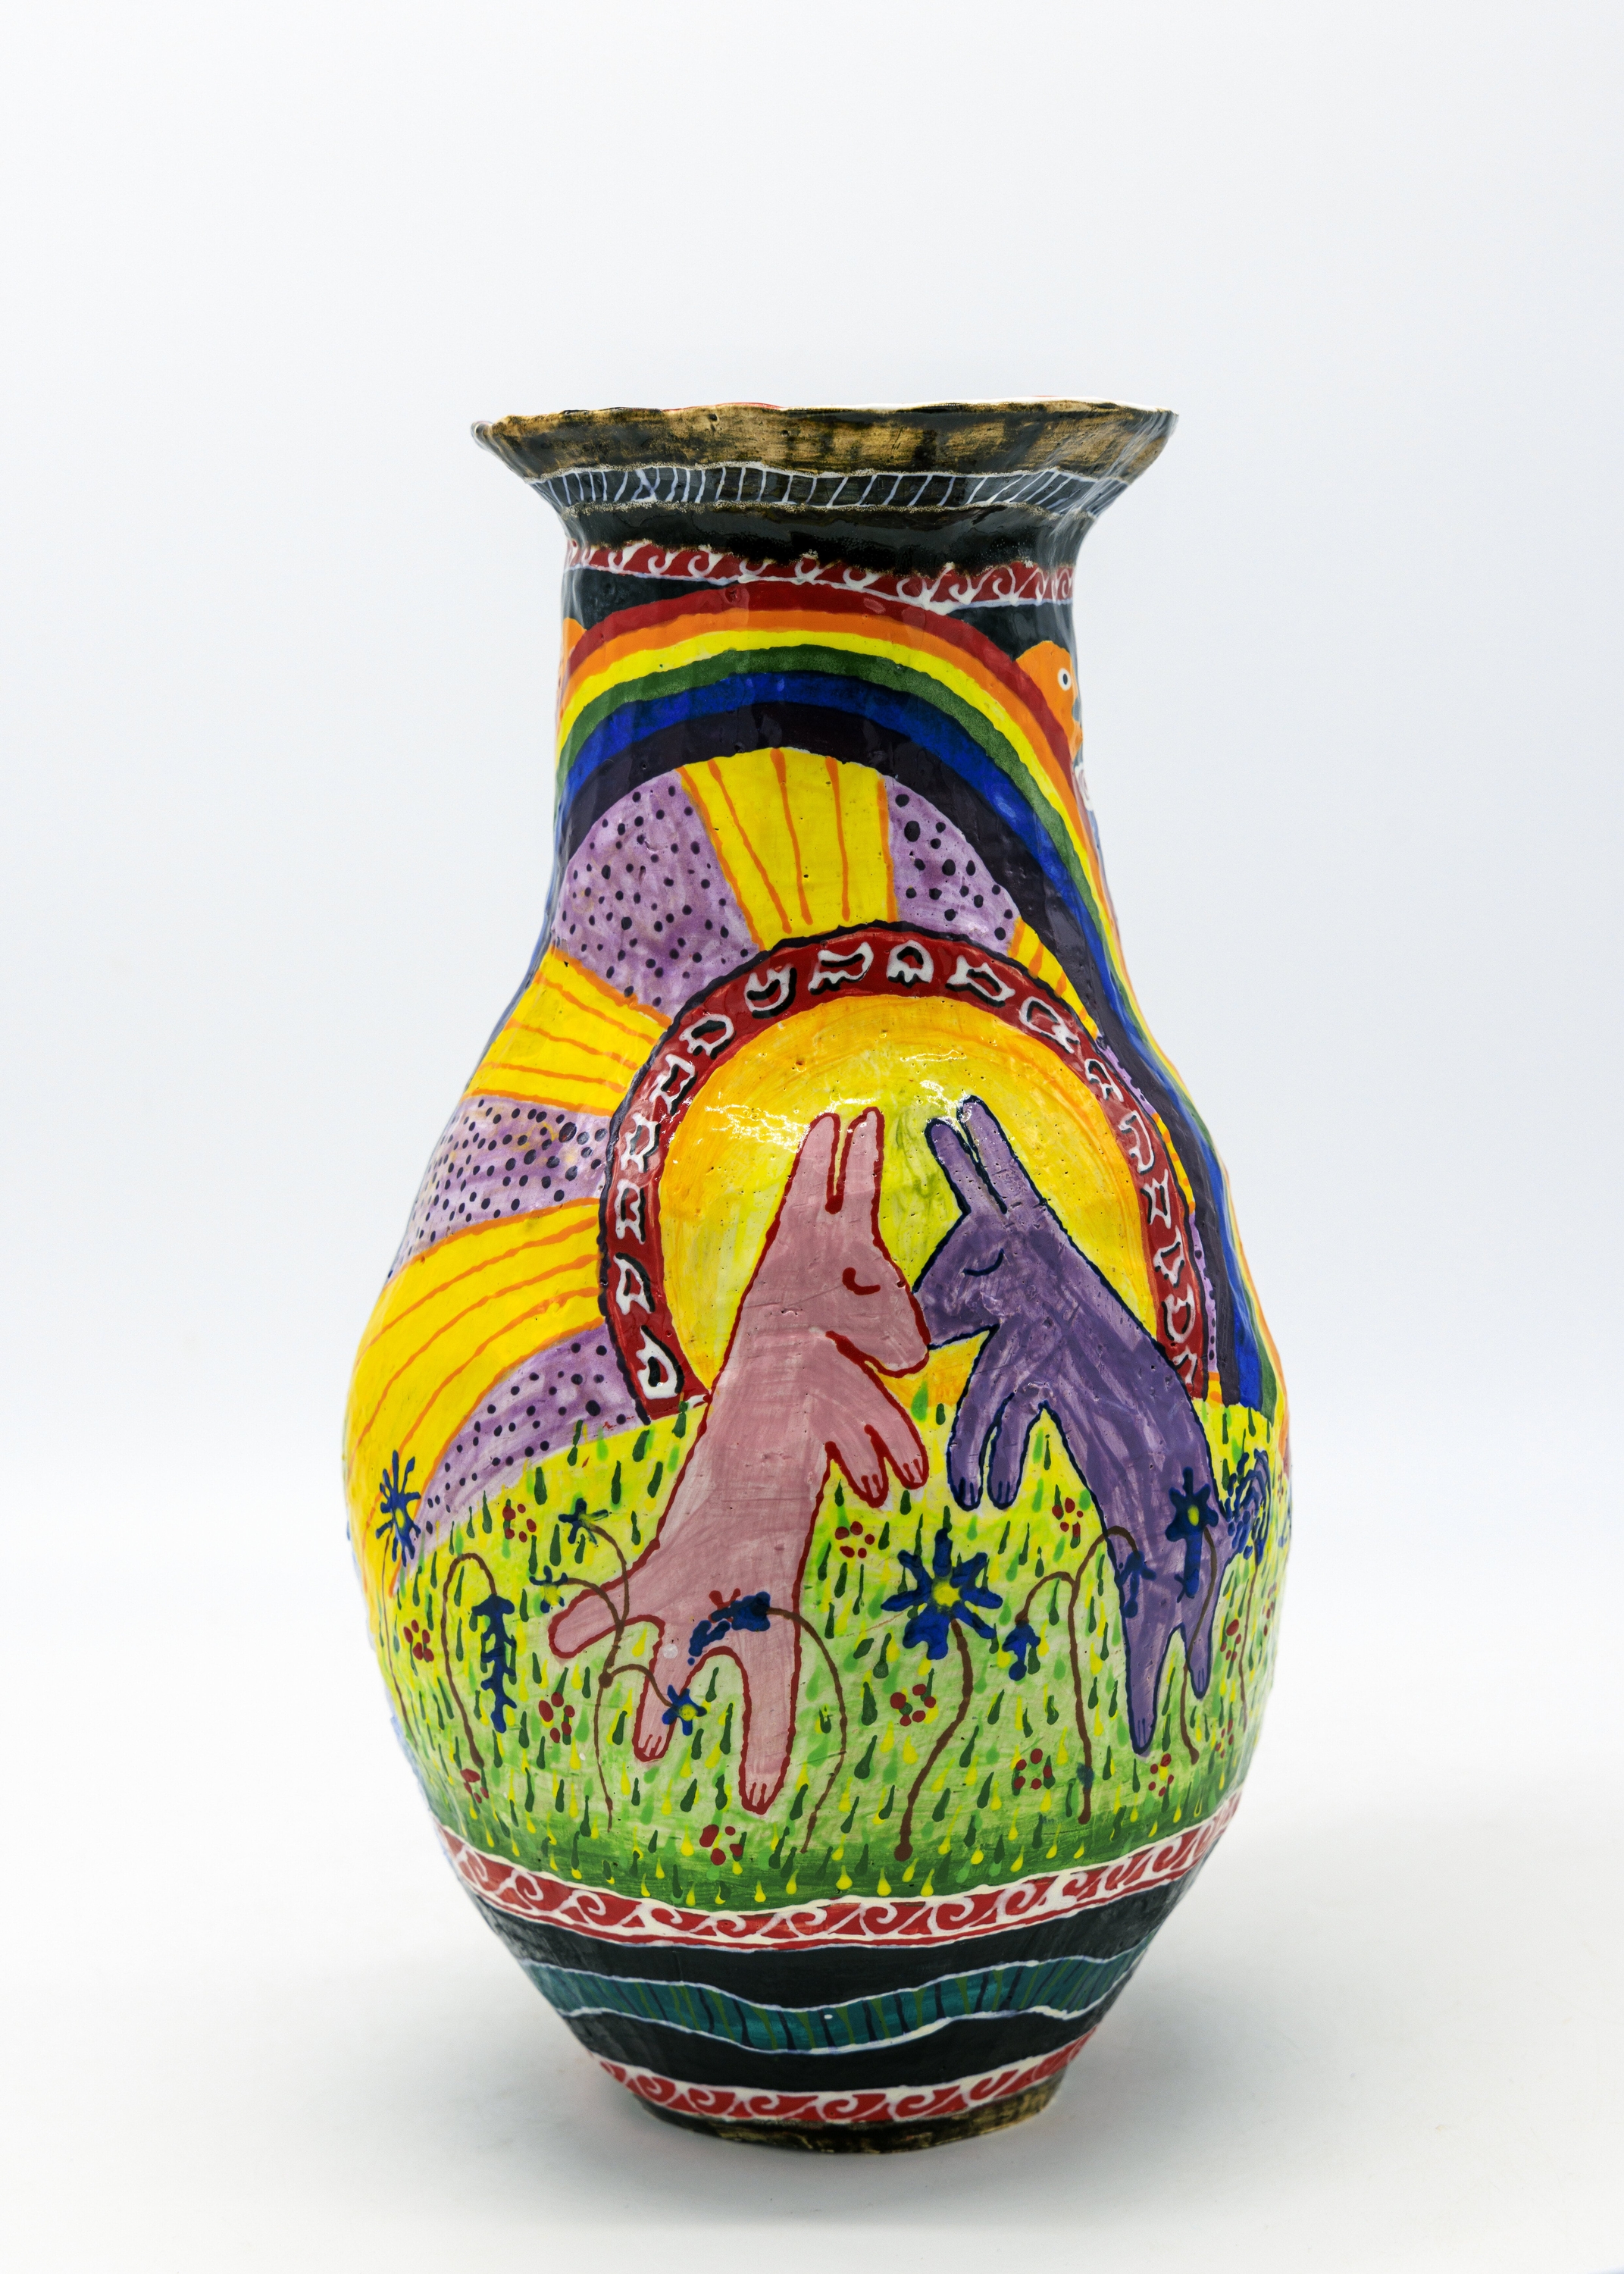 Ceramic vase with a painted scene of two animals resting on each other, with a rainbow and plants in the background.